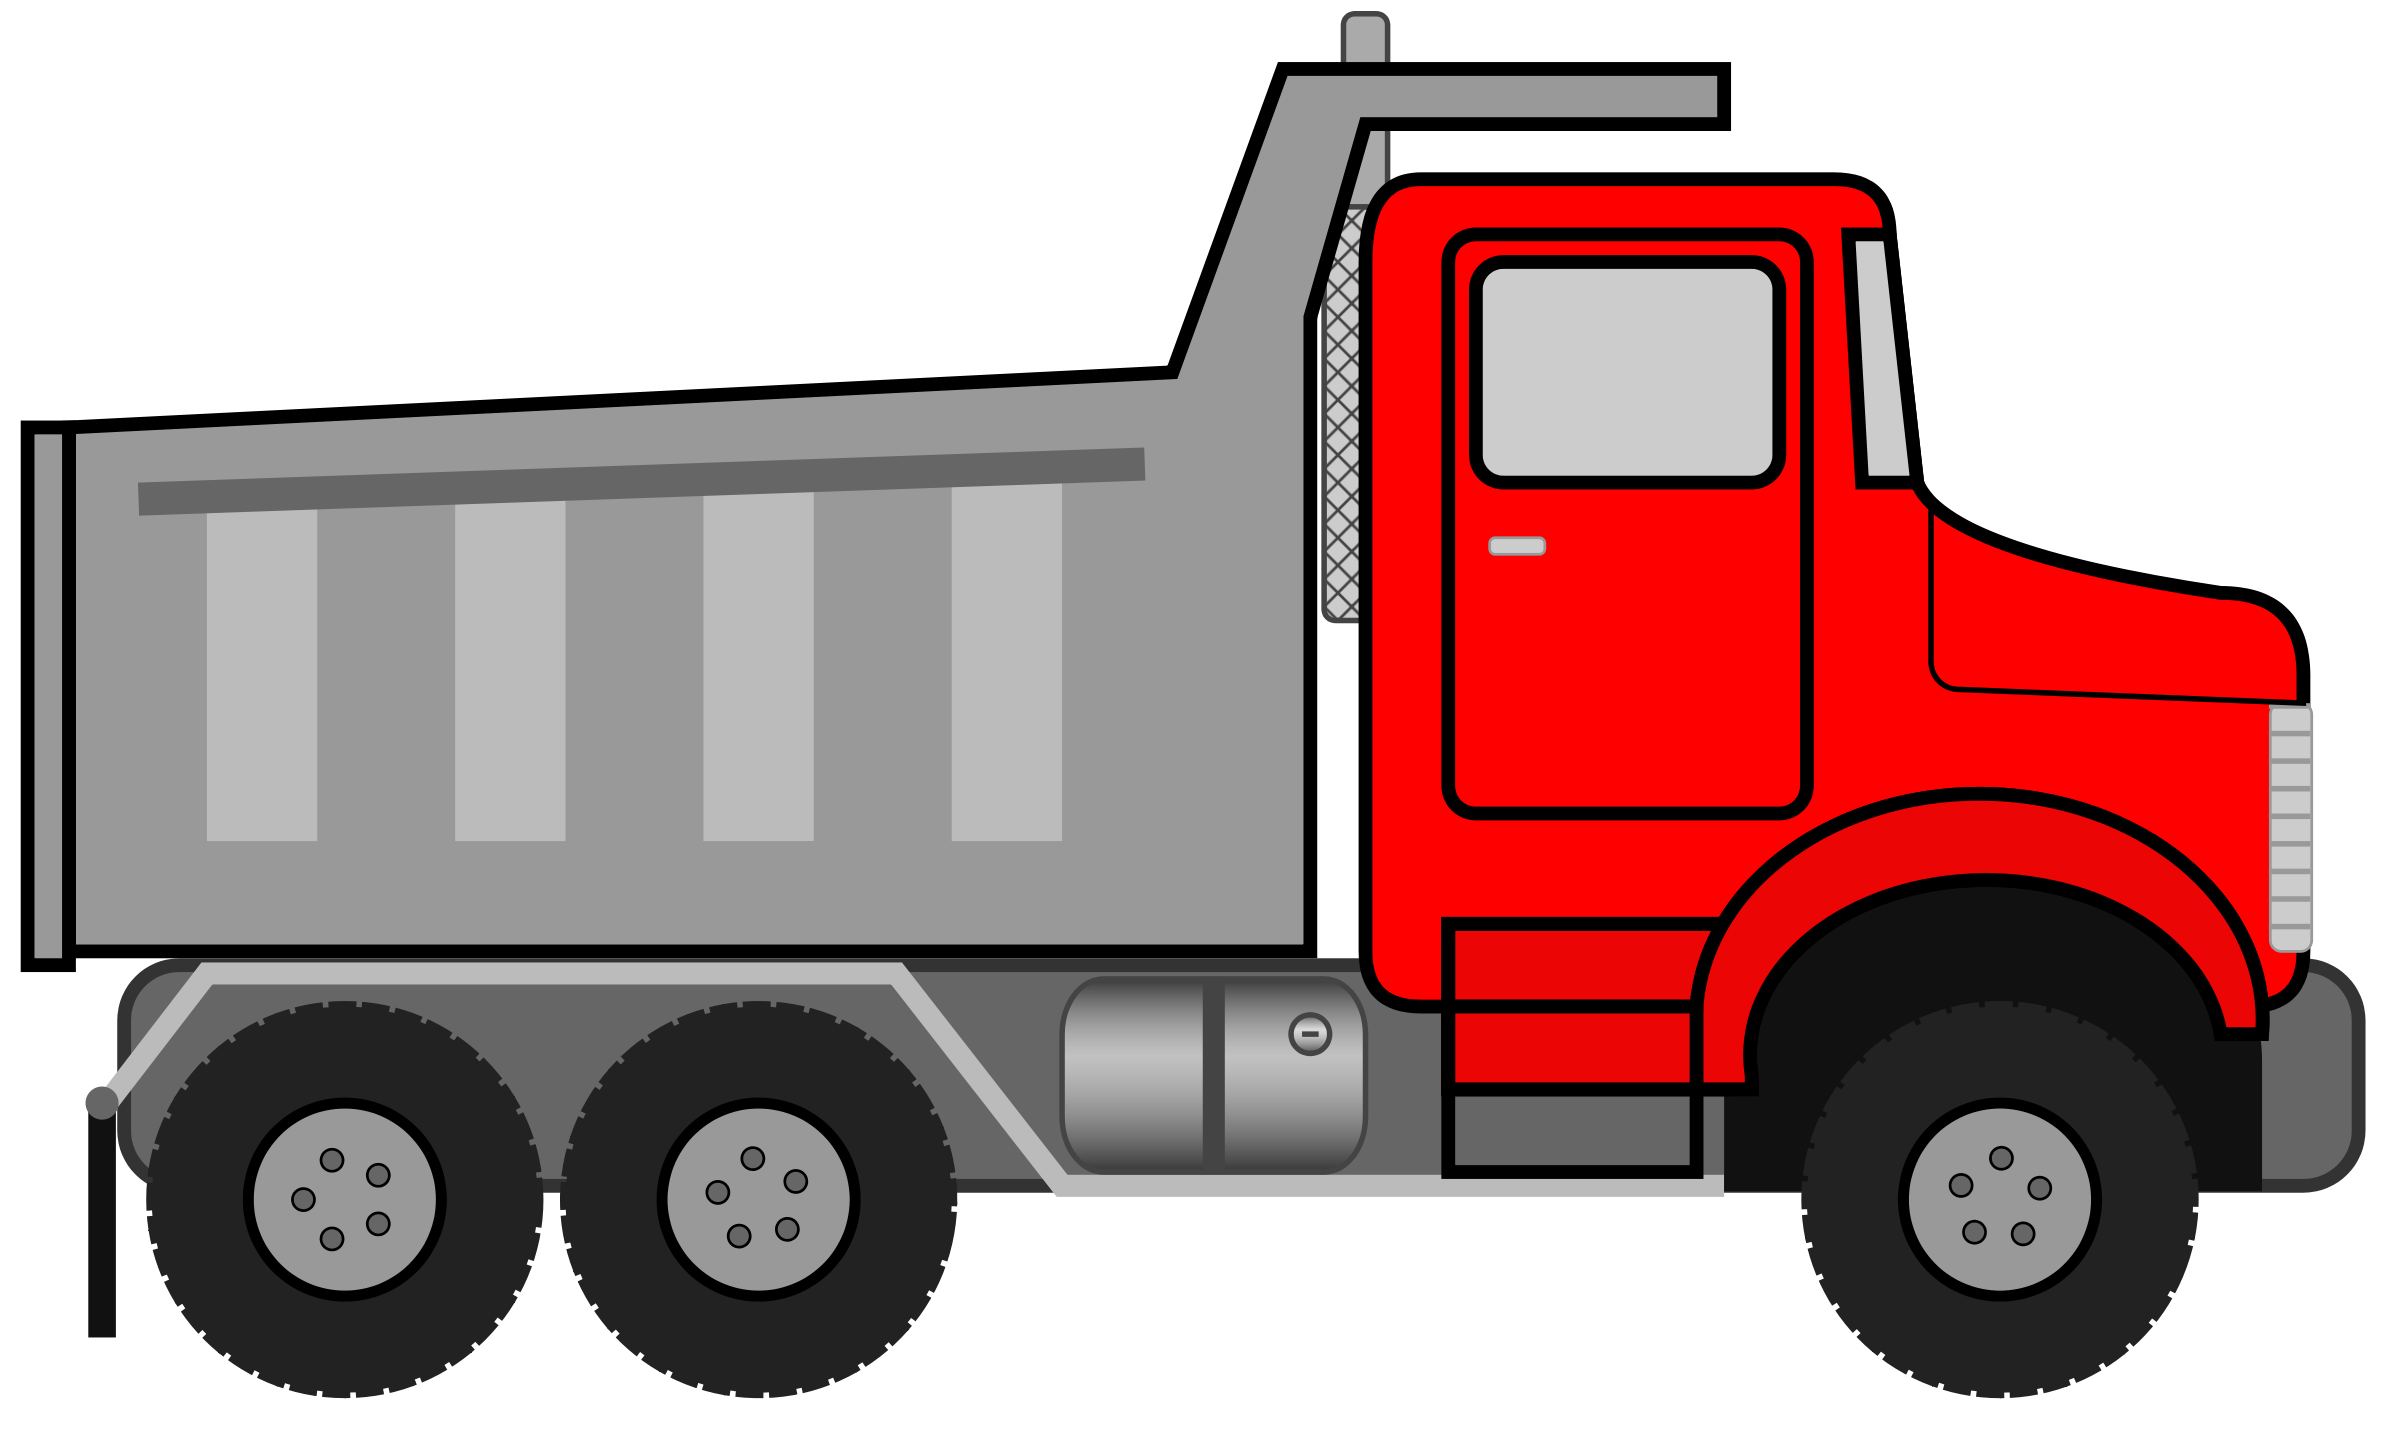 Truck clip art black and white free clipart image clipartcow